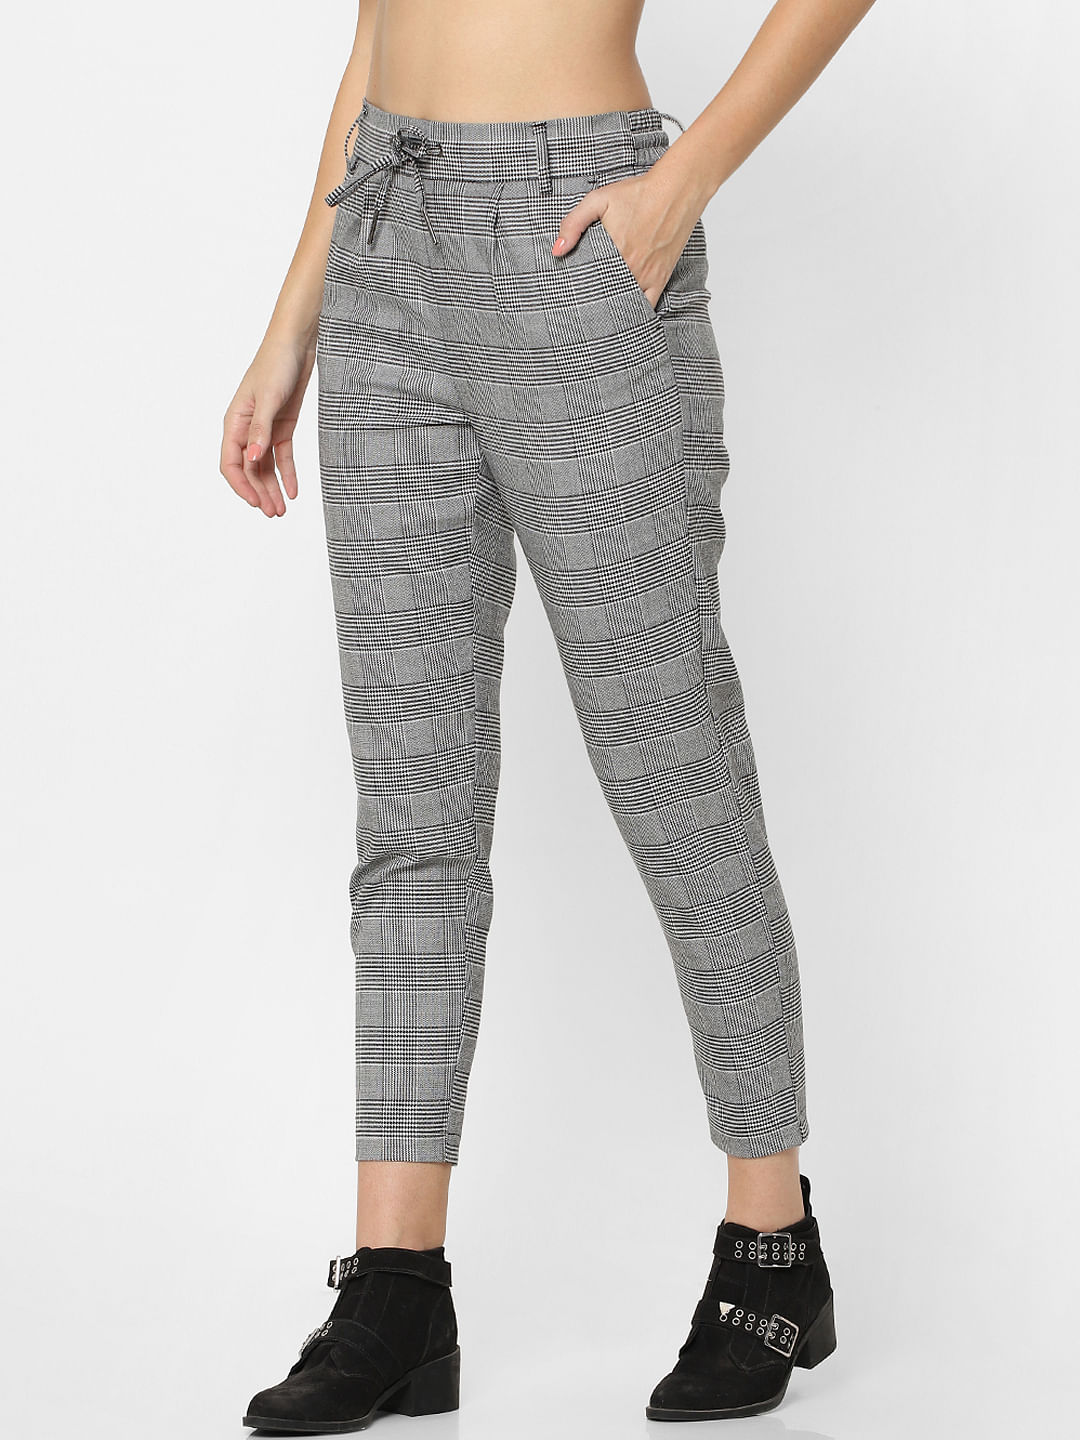 River Island super skinny checked trousers in grey  ASOS